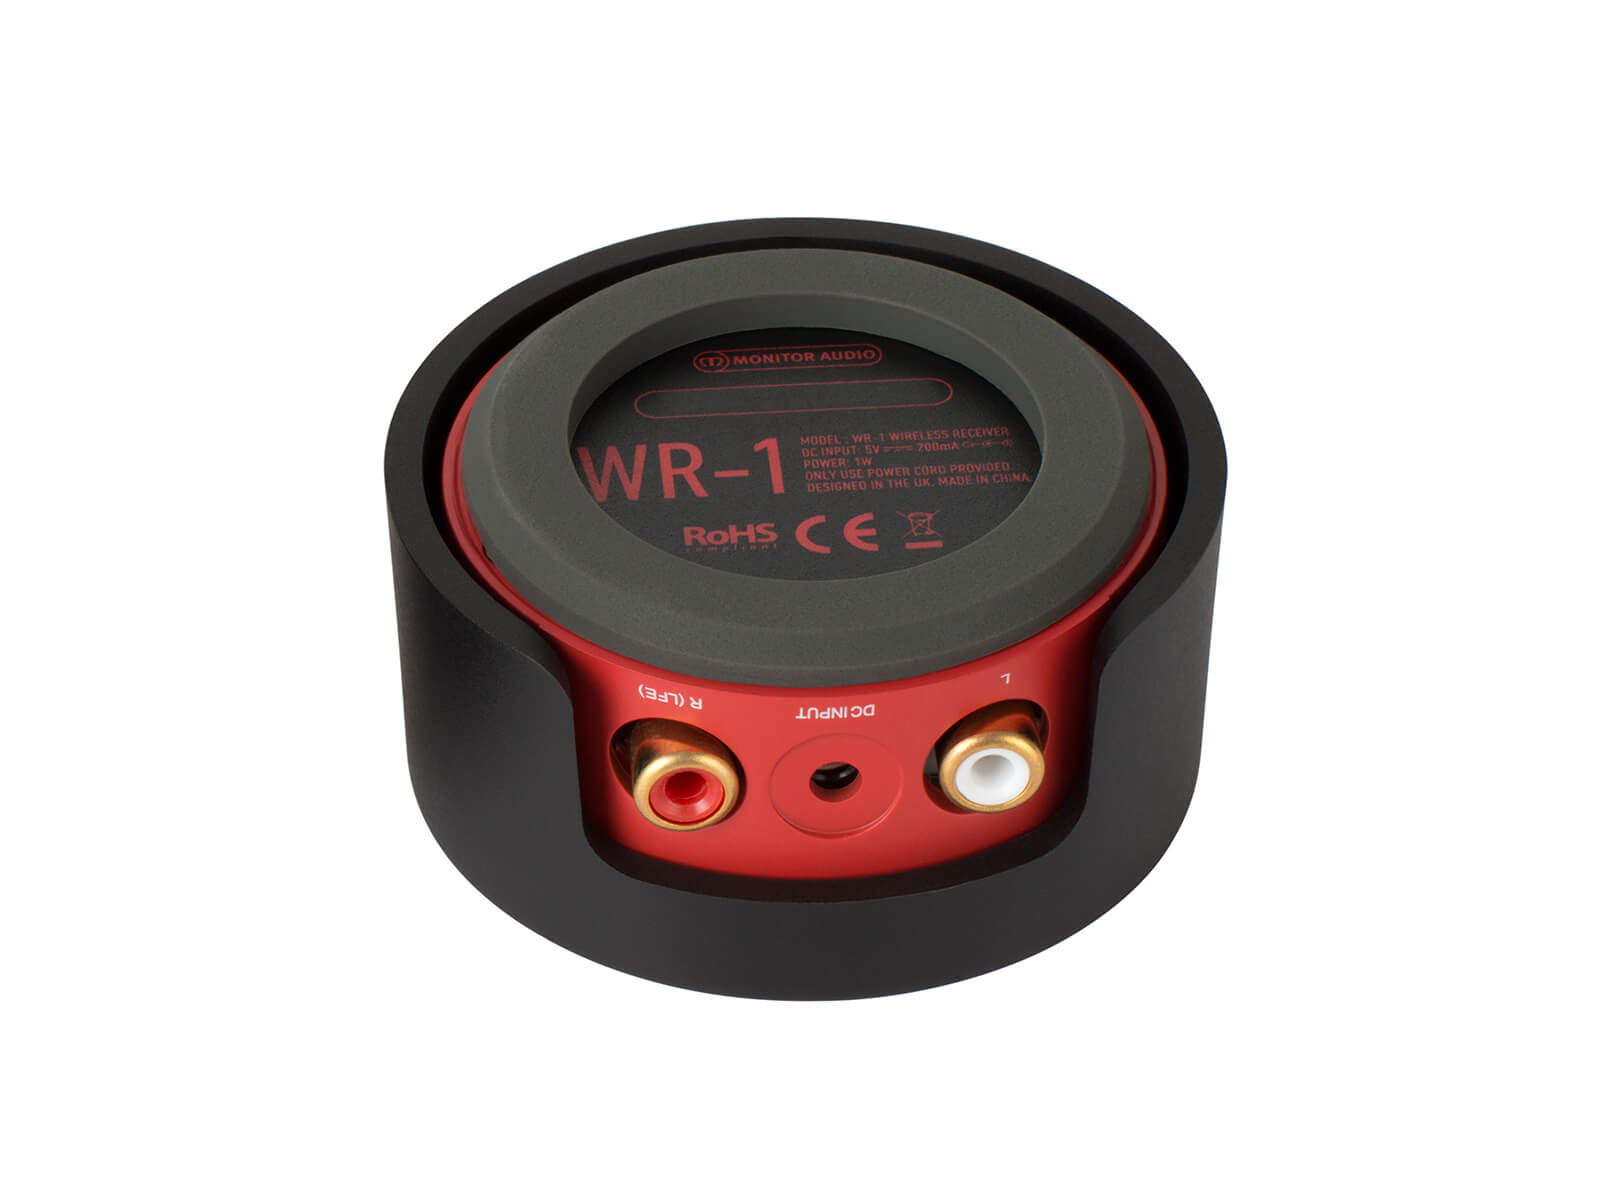 WR-1 ultra-compact wireless receiver, bottom view.